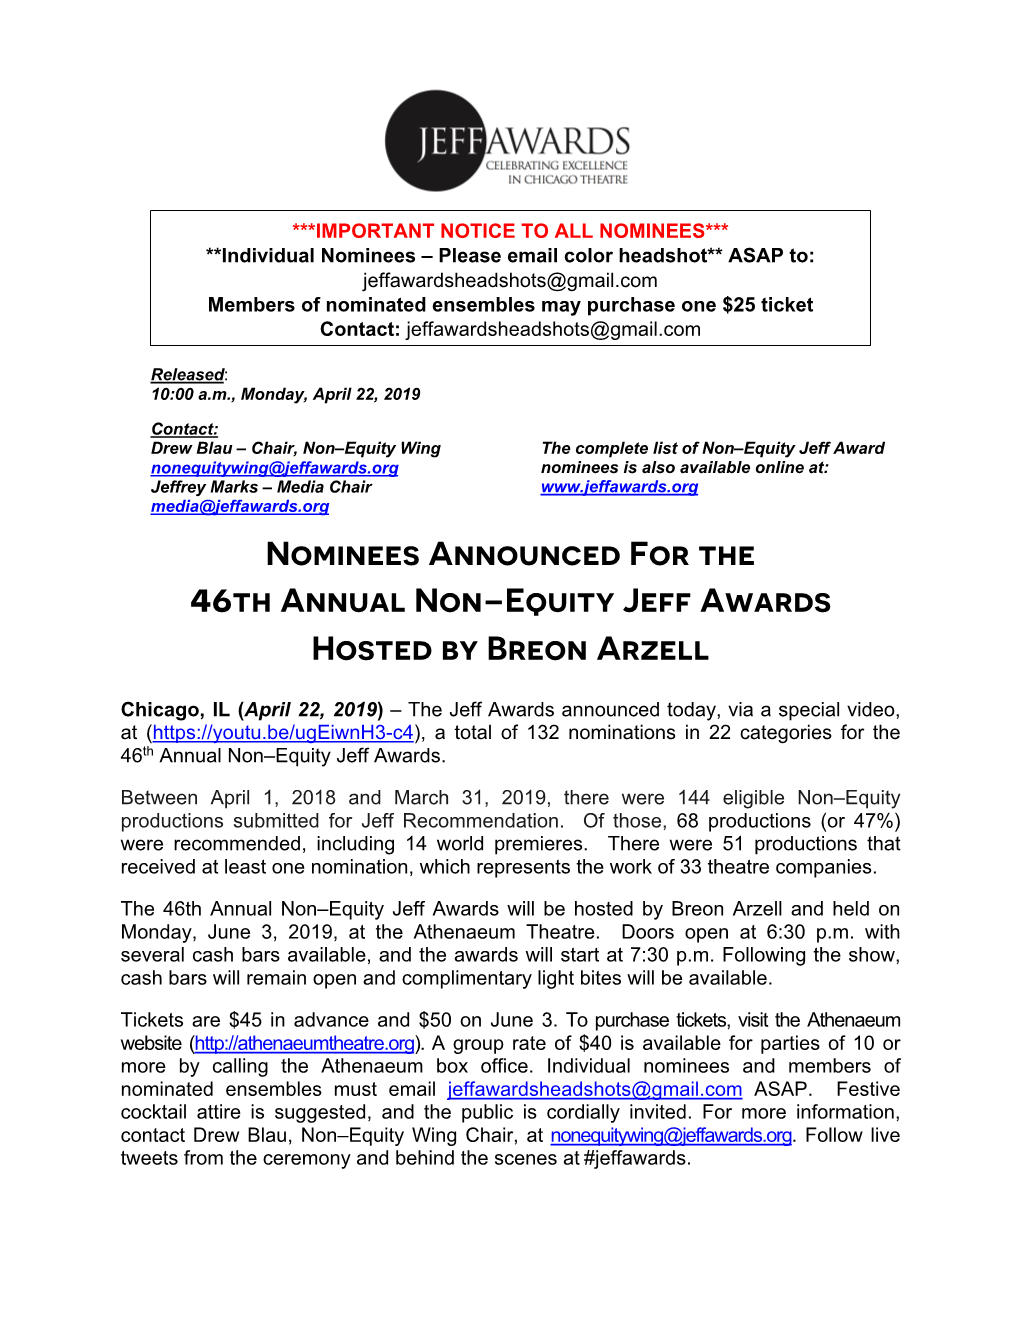 Nominees Announced for the 46Th Annual Non–Equity Jeff Awards Hosted by Breon Arzell